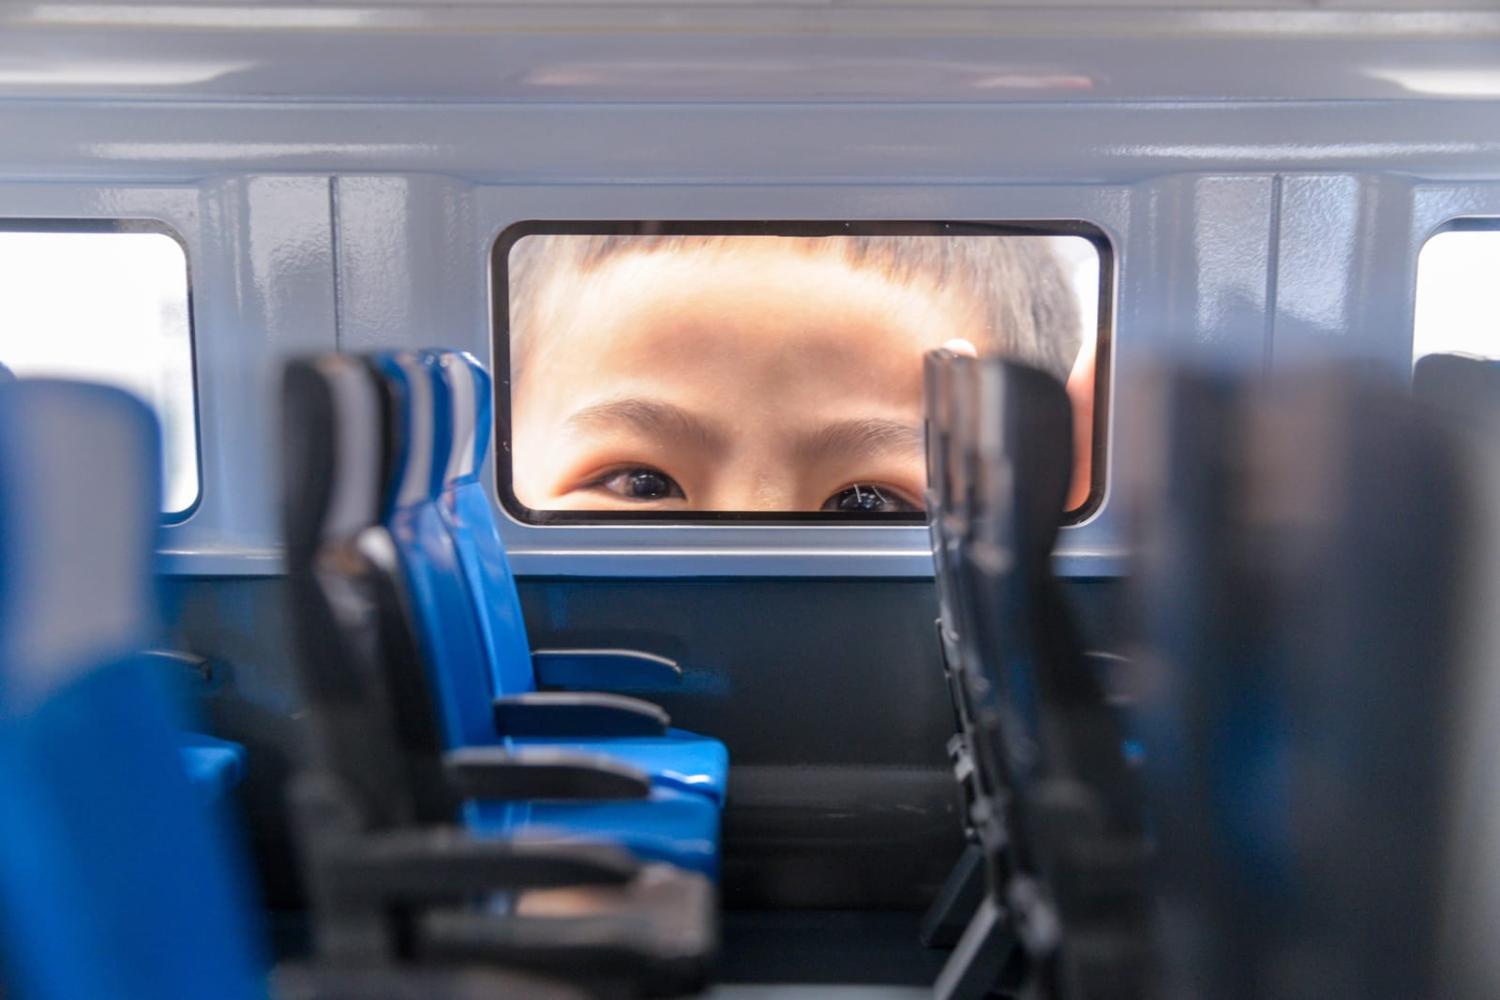 A child looks inside the model of a high-speed train of the Jakarta-Bandung High-Speed Railway at Halim Station in Jakarta, Indonesia, 5 November (Xu Qin/Xinhua via Getty Images)